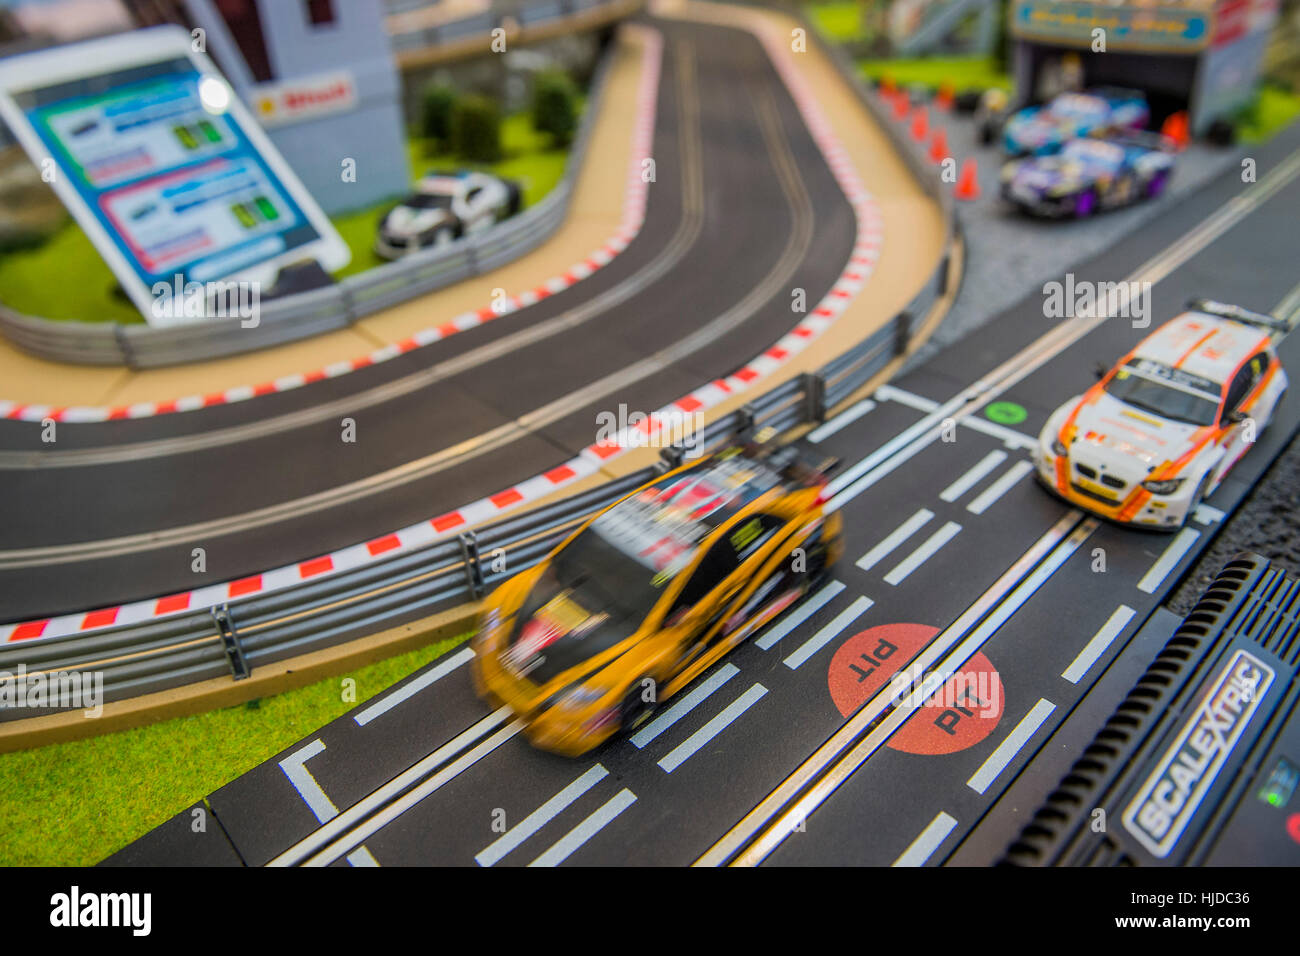 London, UK. 24th Jan, 2017. Tablet app controller and Scalextrics set on the Hornby stand - The London Toy Fair opens at Olympia exhibition centre. Organised by the British Toy and Hobby Association it is the only dedicated toy, game and hobby trade exhibition in the UK. It runs for three days, with more than 240 exhibiting companies ranging from the large internationals to the new start up companies. London 24/01/17 Credit: Guy Bell/Alamy Live News Stock Photo